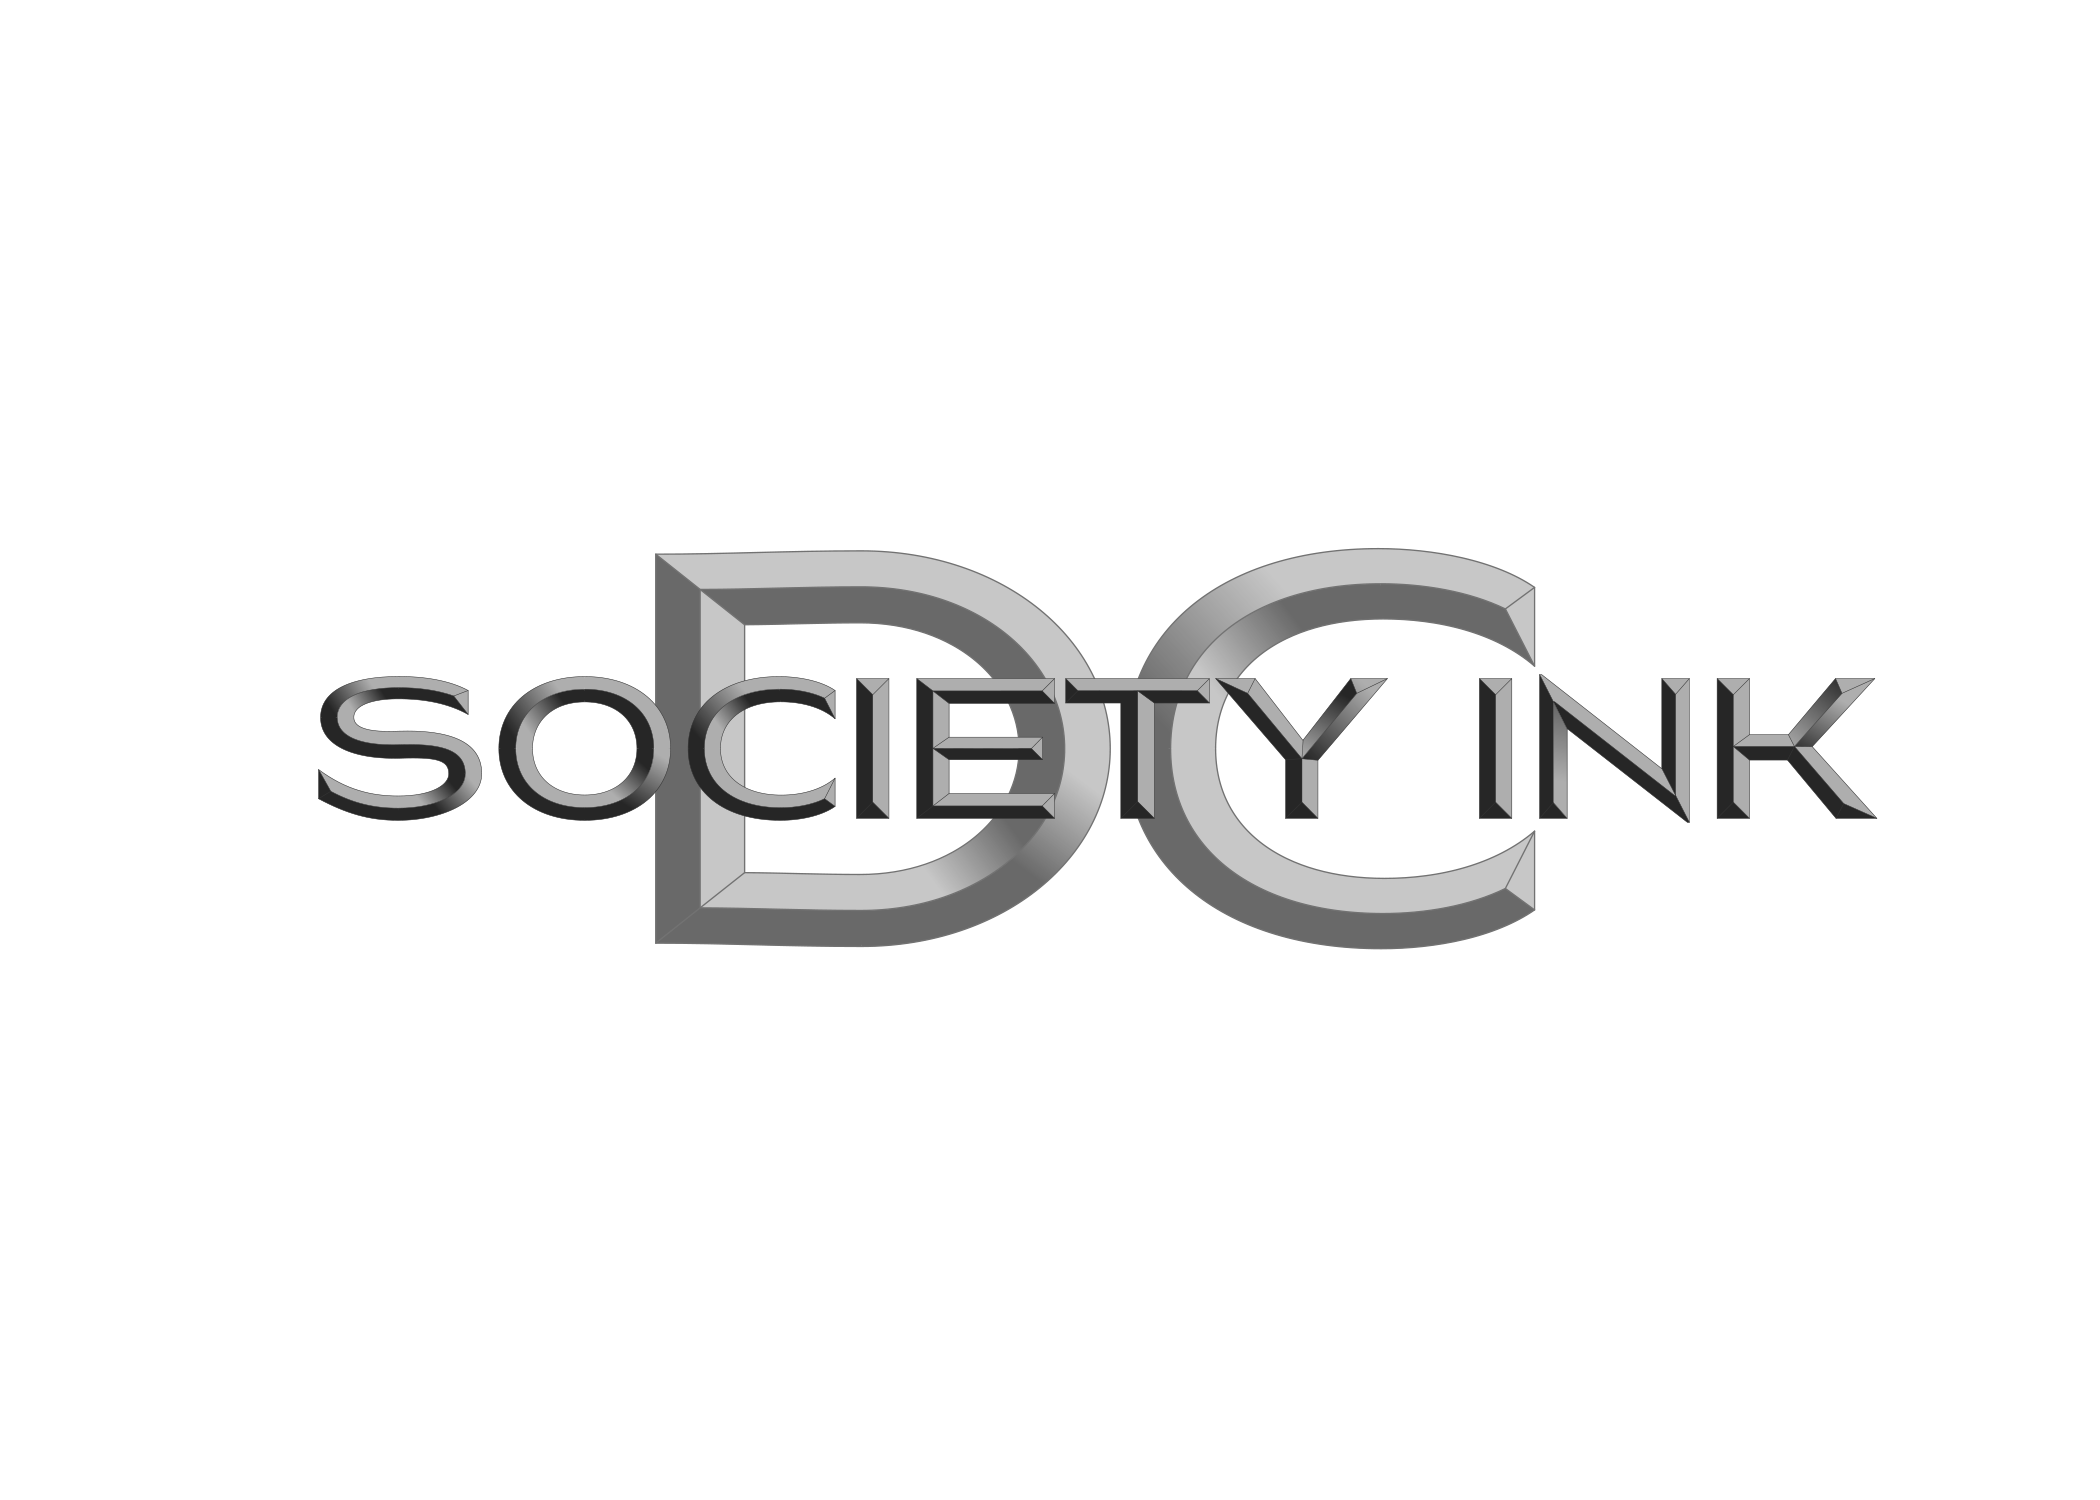 DC SSOCIETY NEW LOGO WITH TRANSPARENT BACKGROUND (1)